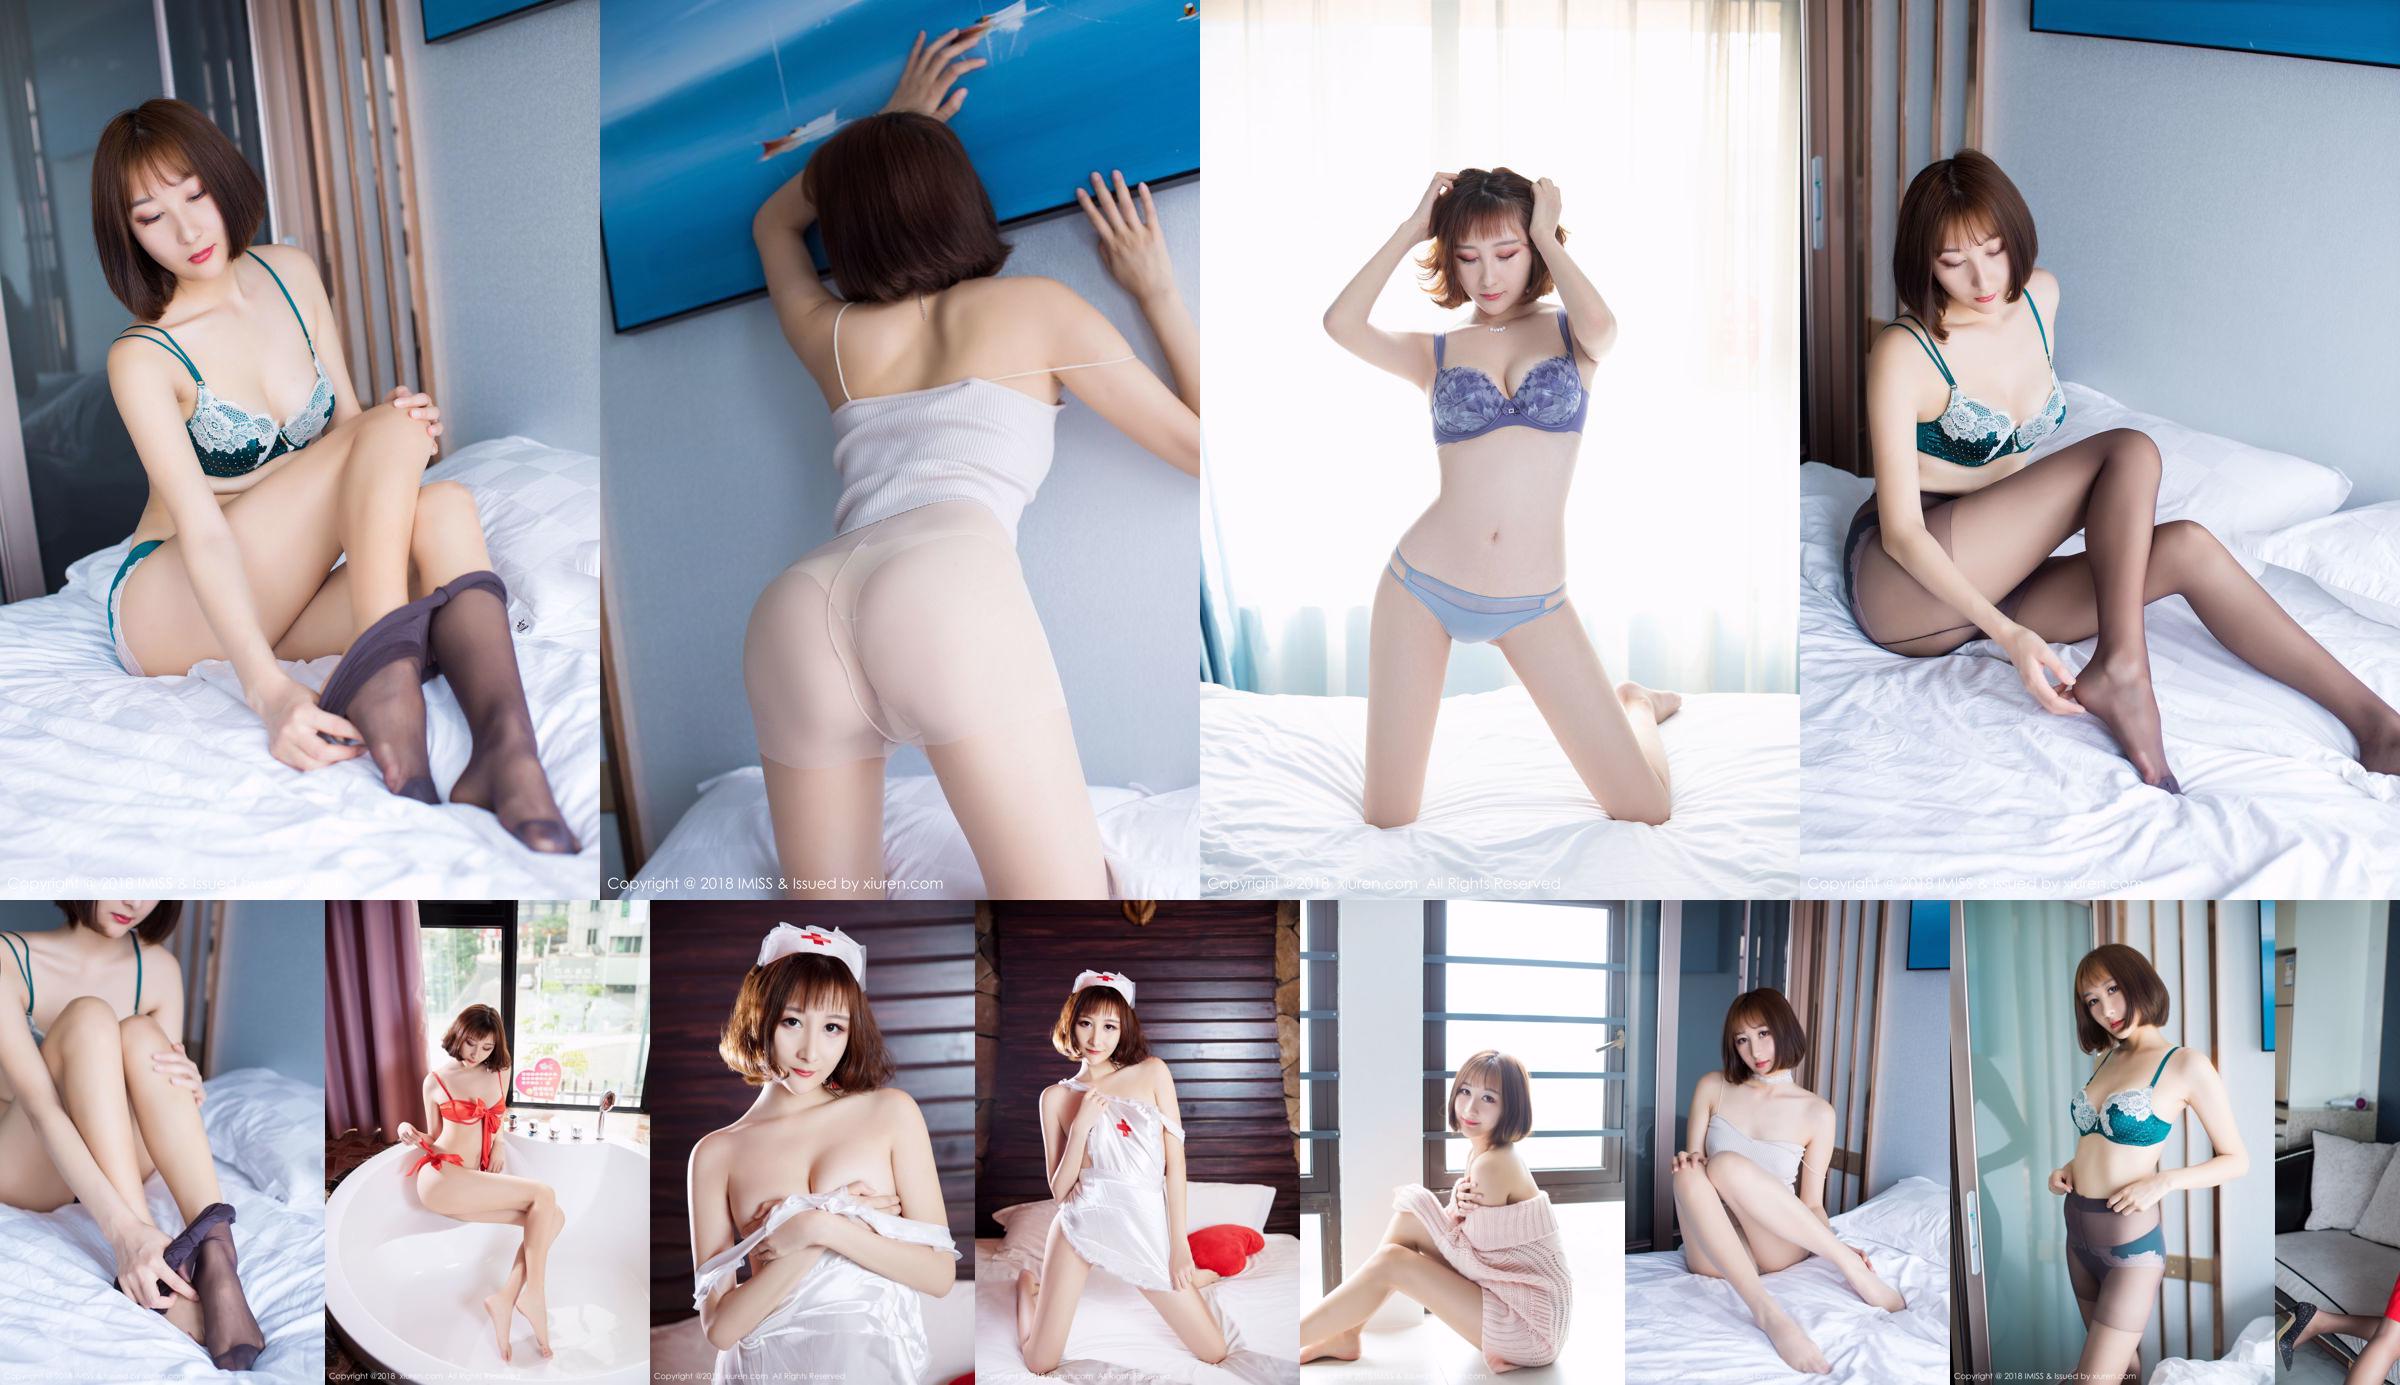 Model @ 九尾 Ivy- „The Ultimate Private Charm” [秀 人 XIUREN] nr 1046 No.213c39 Strona 1